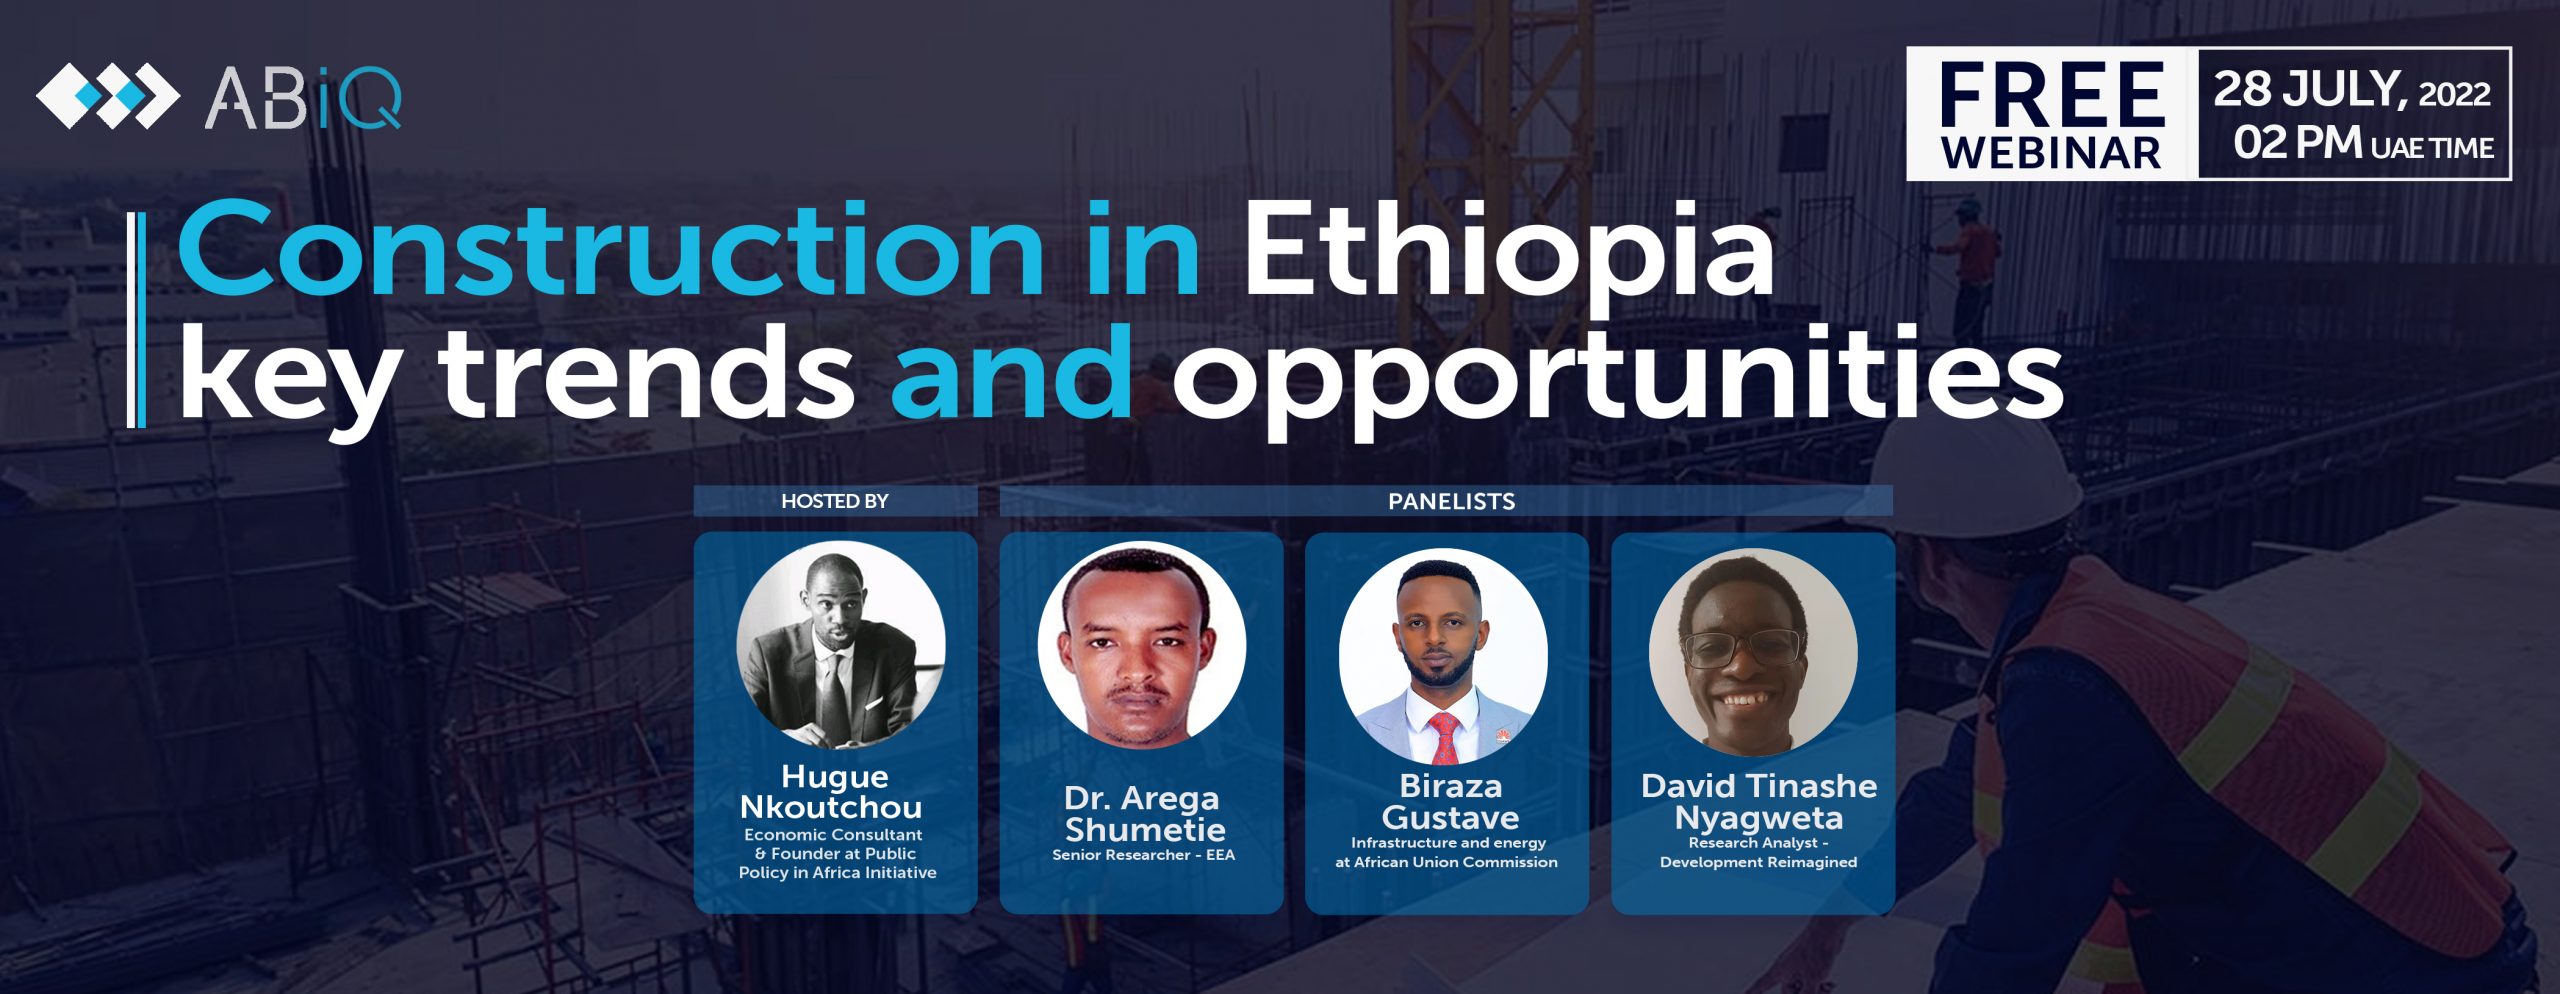 Construction in Ethiopia: key trends and opportunities